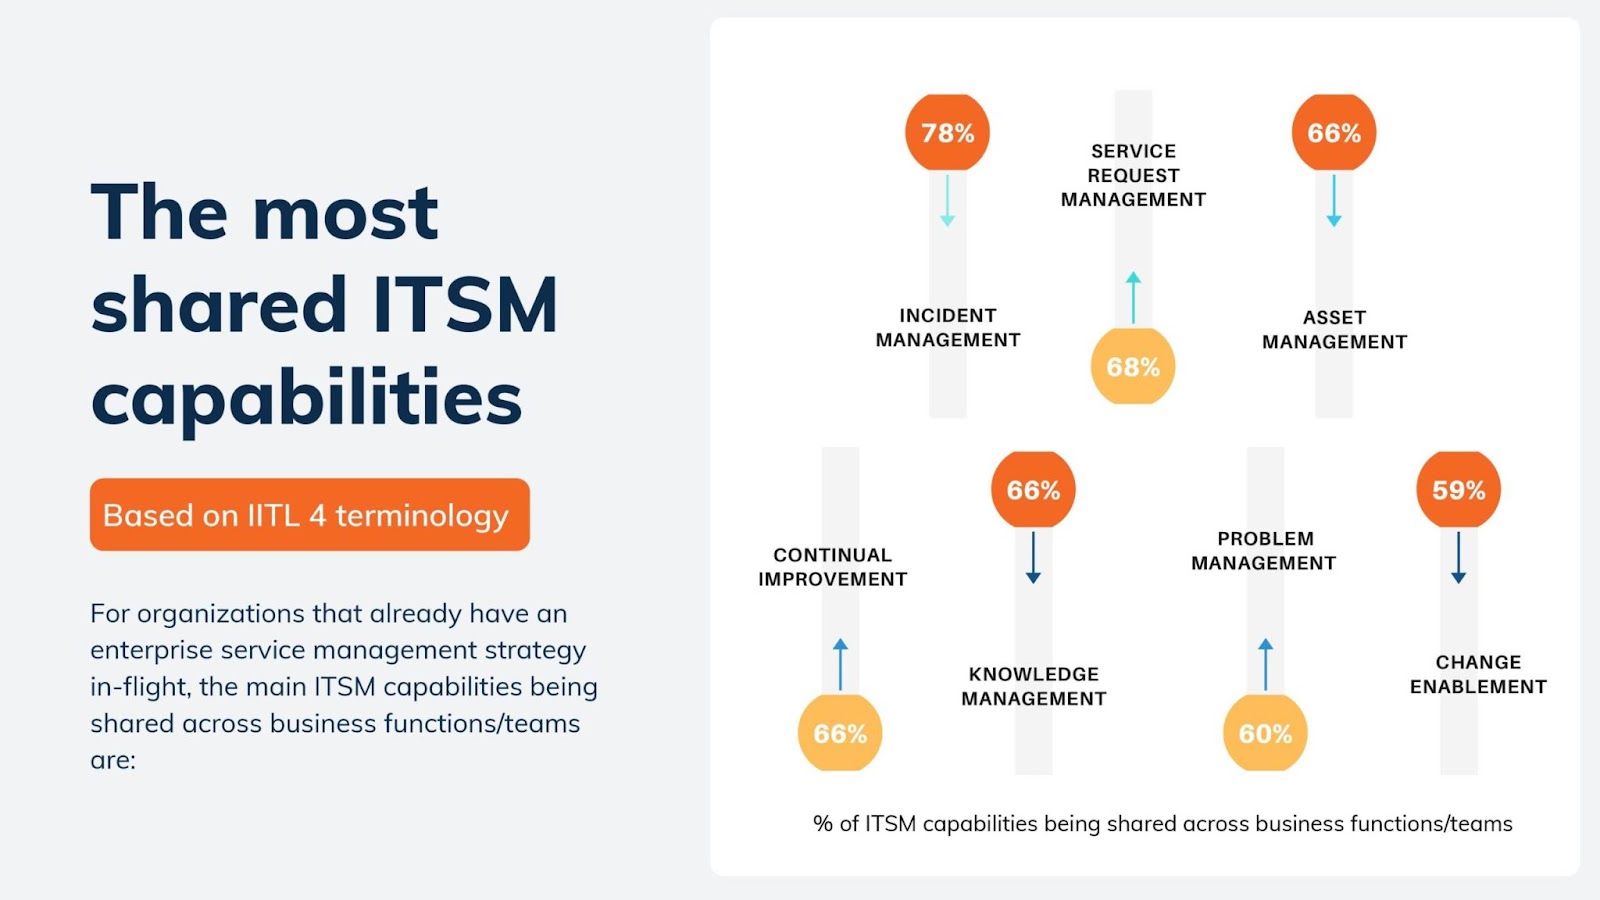 ITSM Capabilities shared across business functions